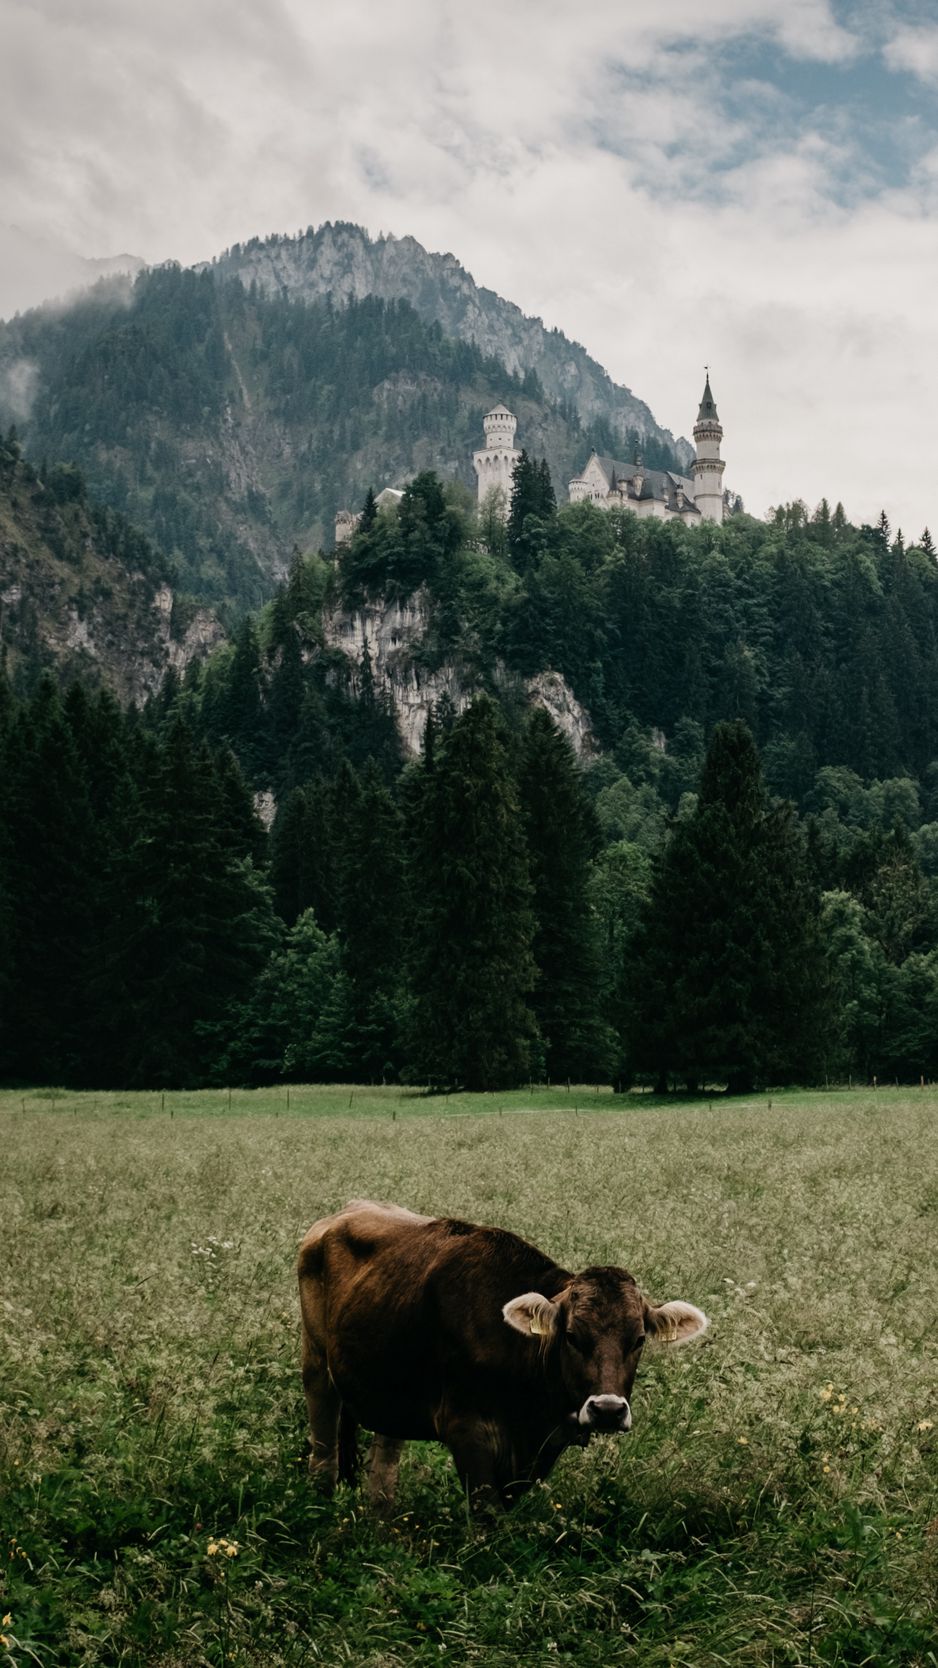 Download wallpaper 938x1668 meadow, bull, mountains, castle, grass, bavaria  iphone 8/7/6s/6 for parallax hd background